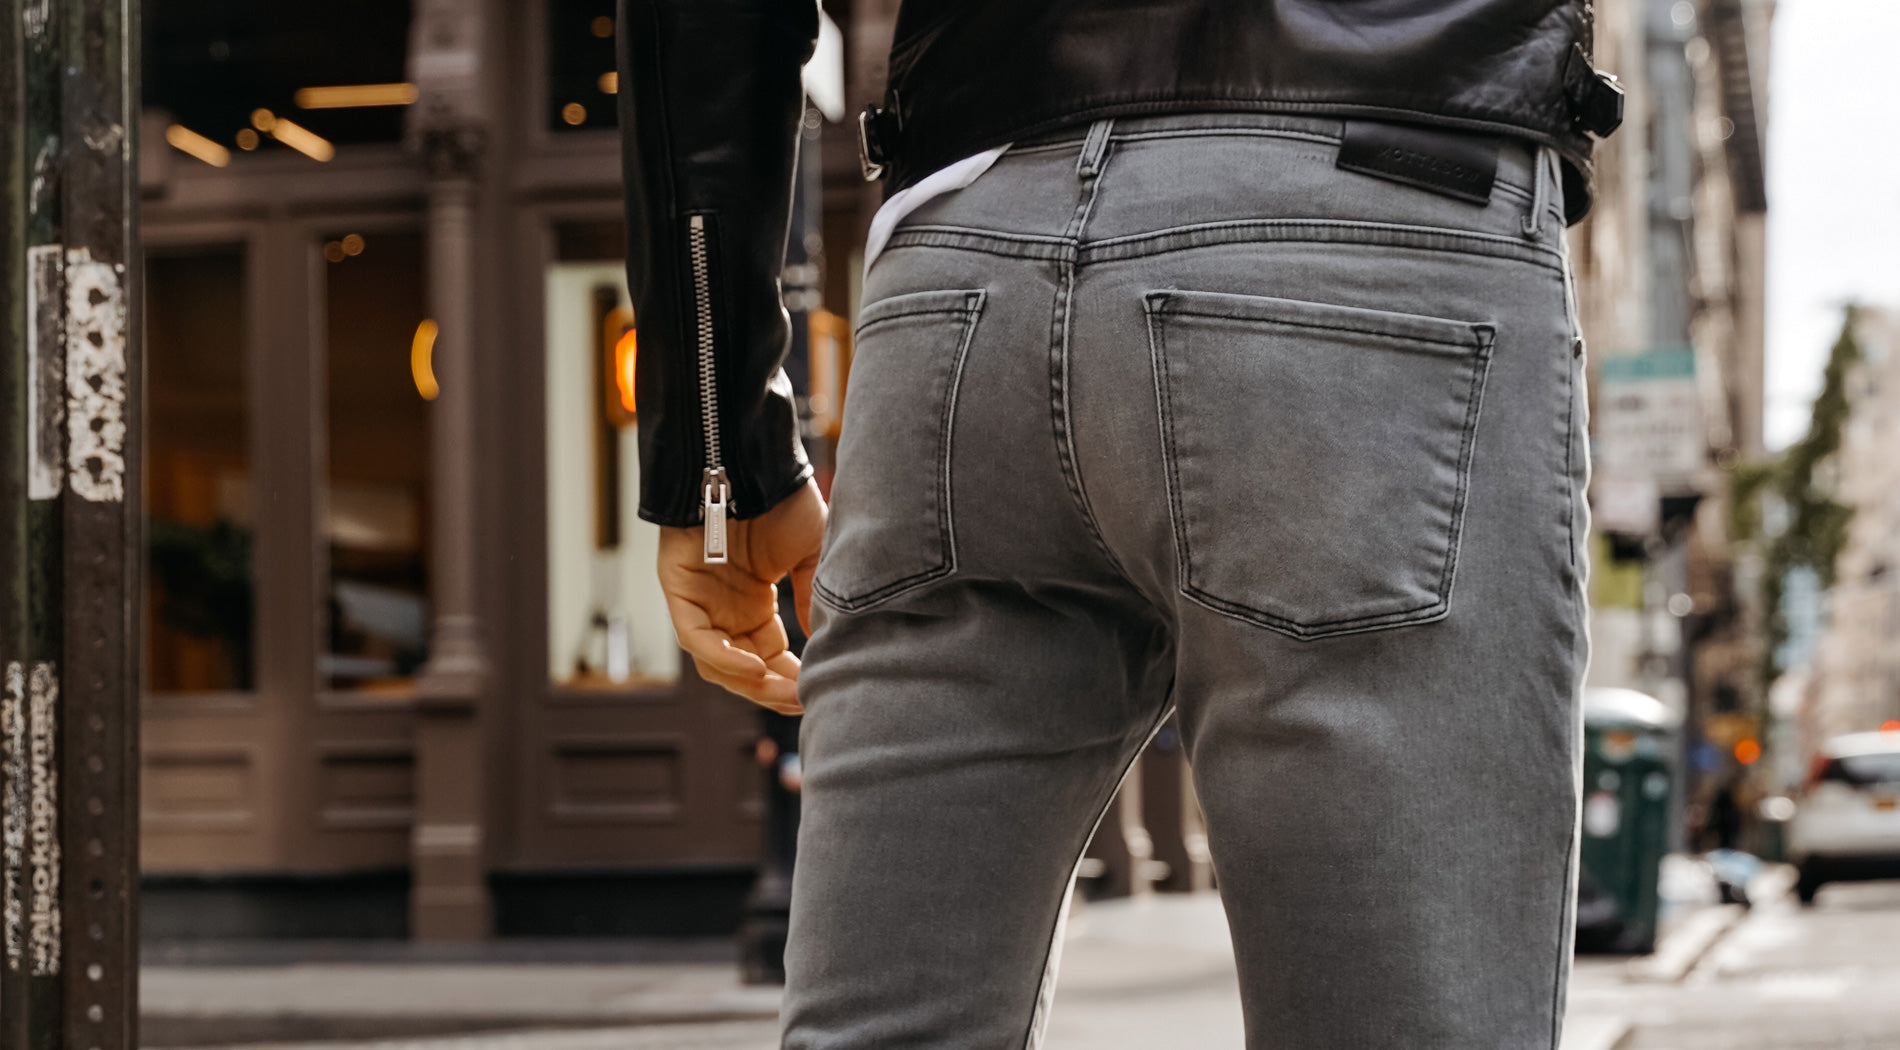 Attention wearers of skinny jeans: don't squat — at least not for